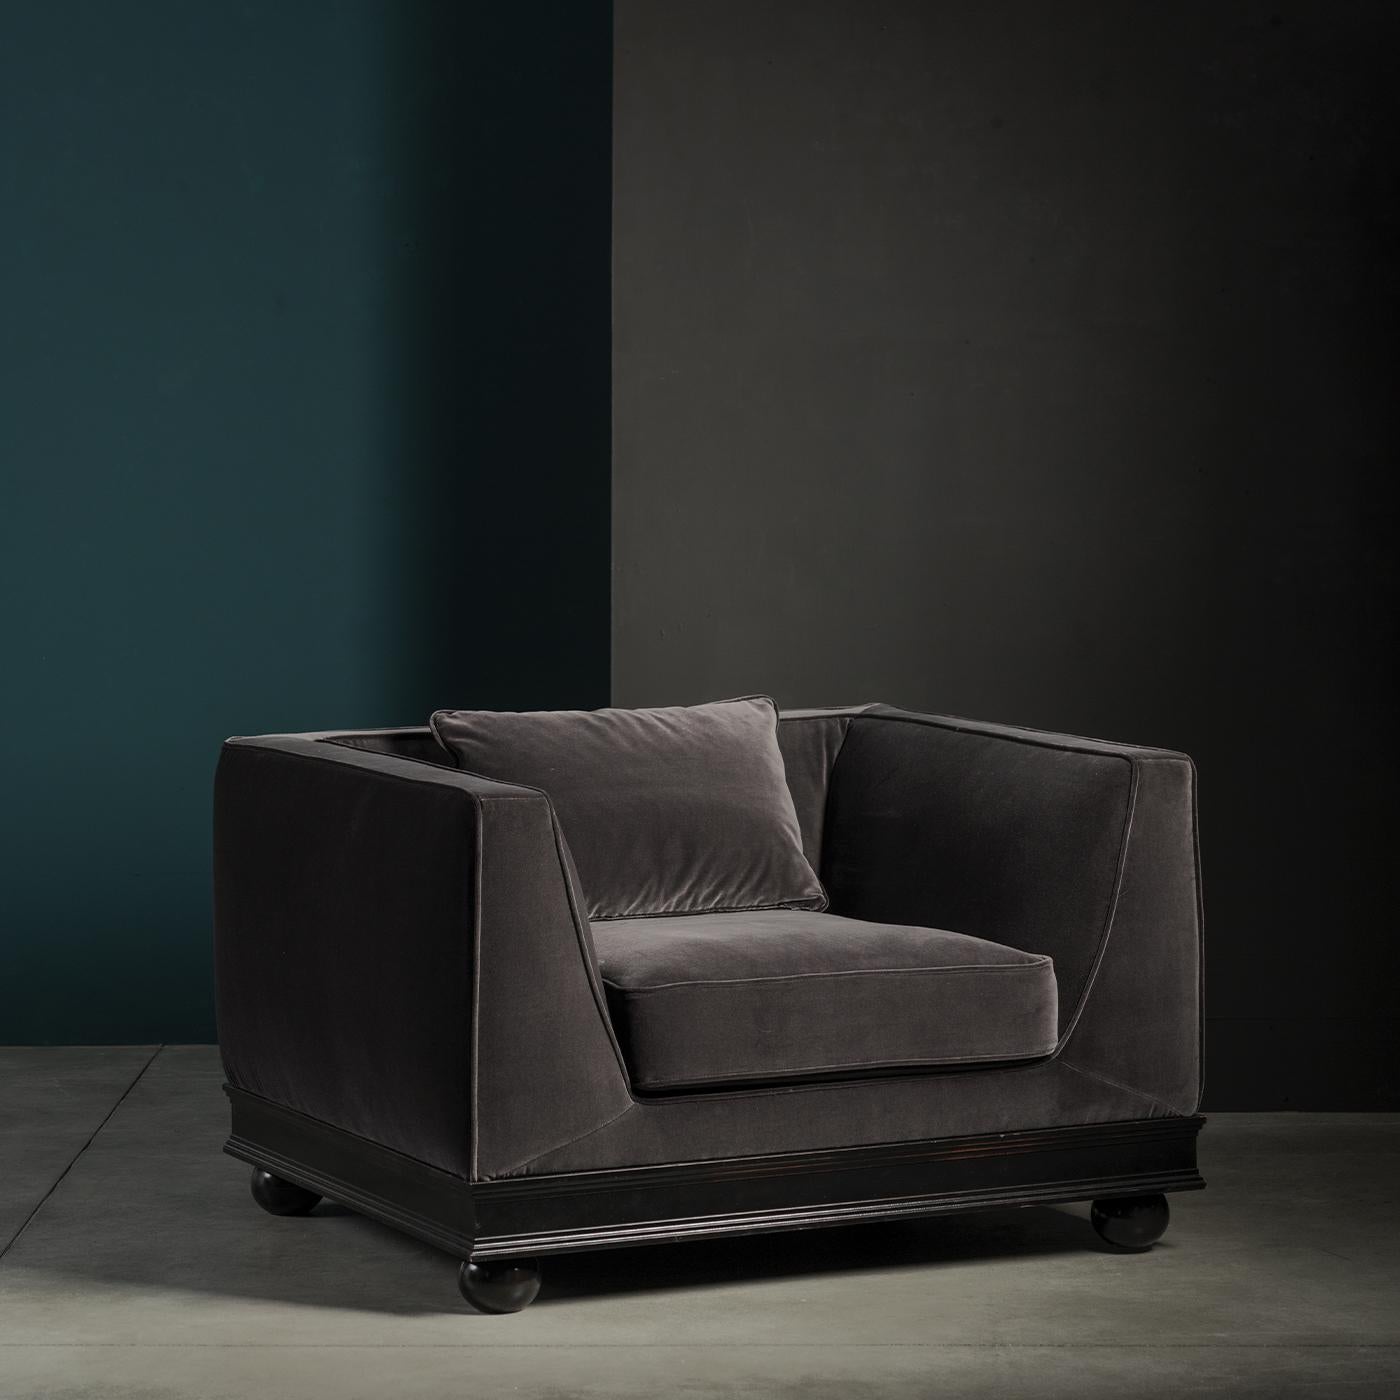 The Paris Chenille Armchair offers a modern take on a traditional design. Its solid wood base boasts a versatile black finish, characterised by classic round feet and contoured detailing. Upholstered in versatile grey chenille fabric with contrast